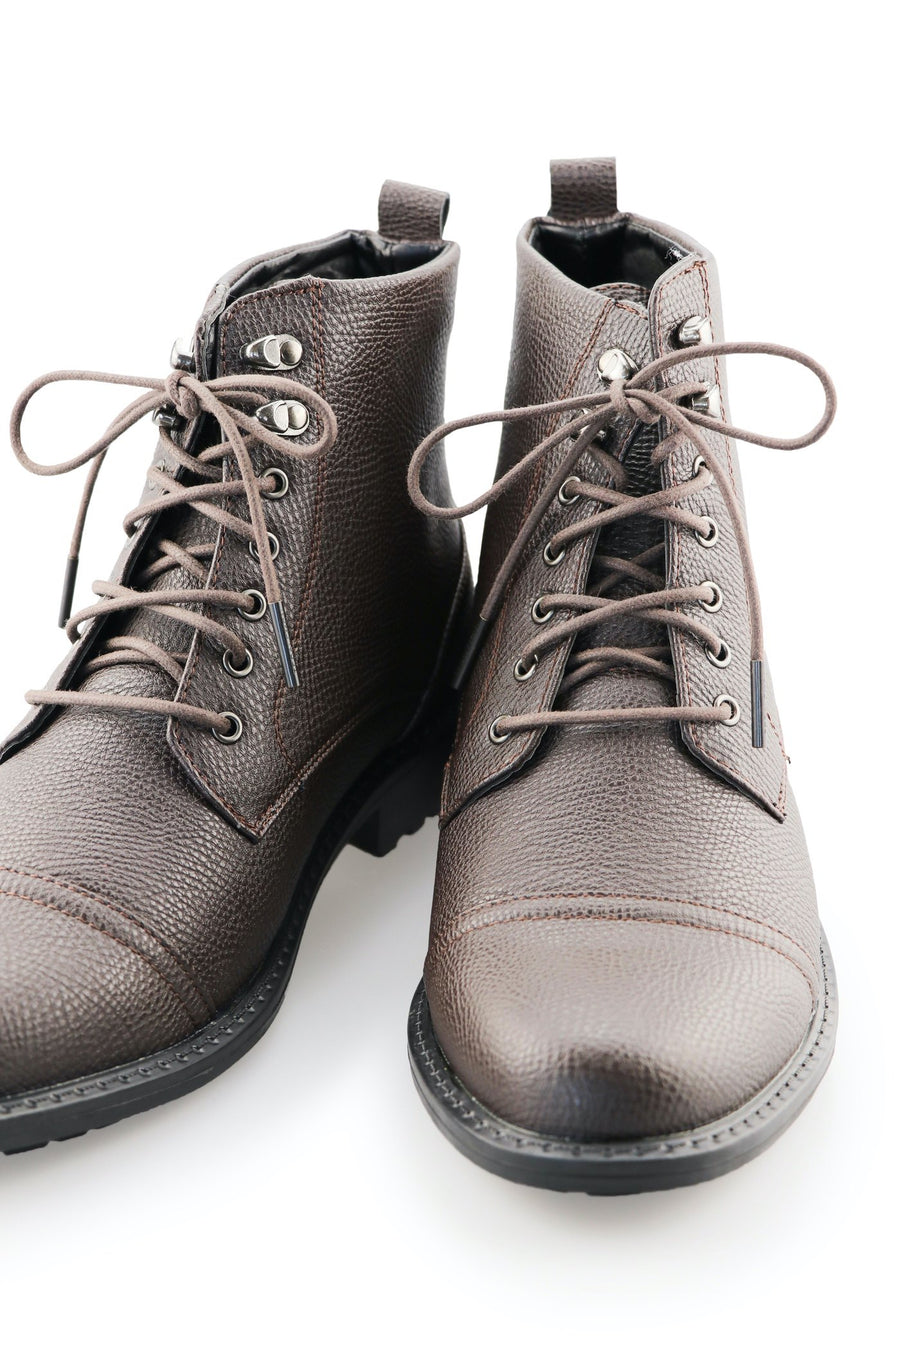 Boot Laces Dark Cocoa Chocolate Waxed Cotton Ted and Lemon with metal aglet